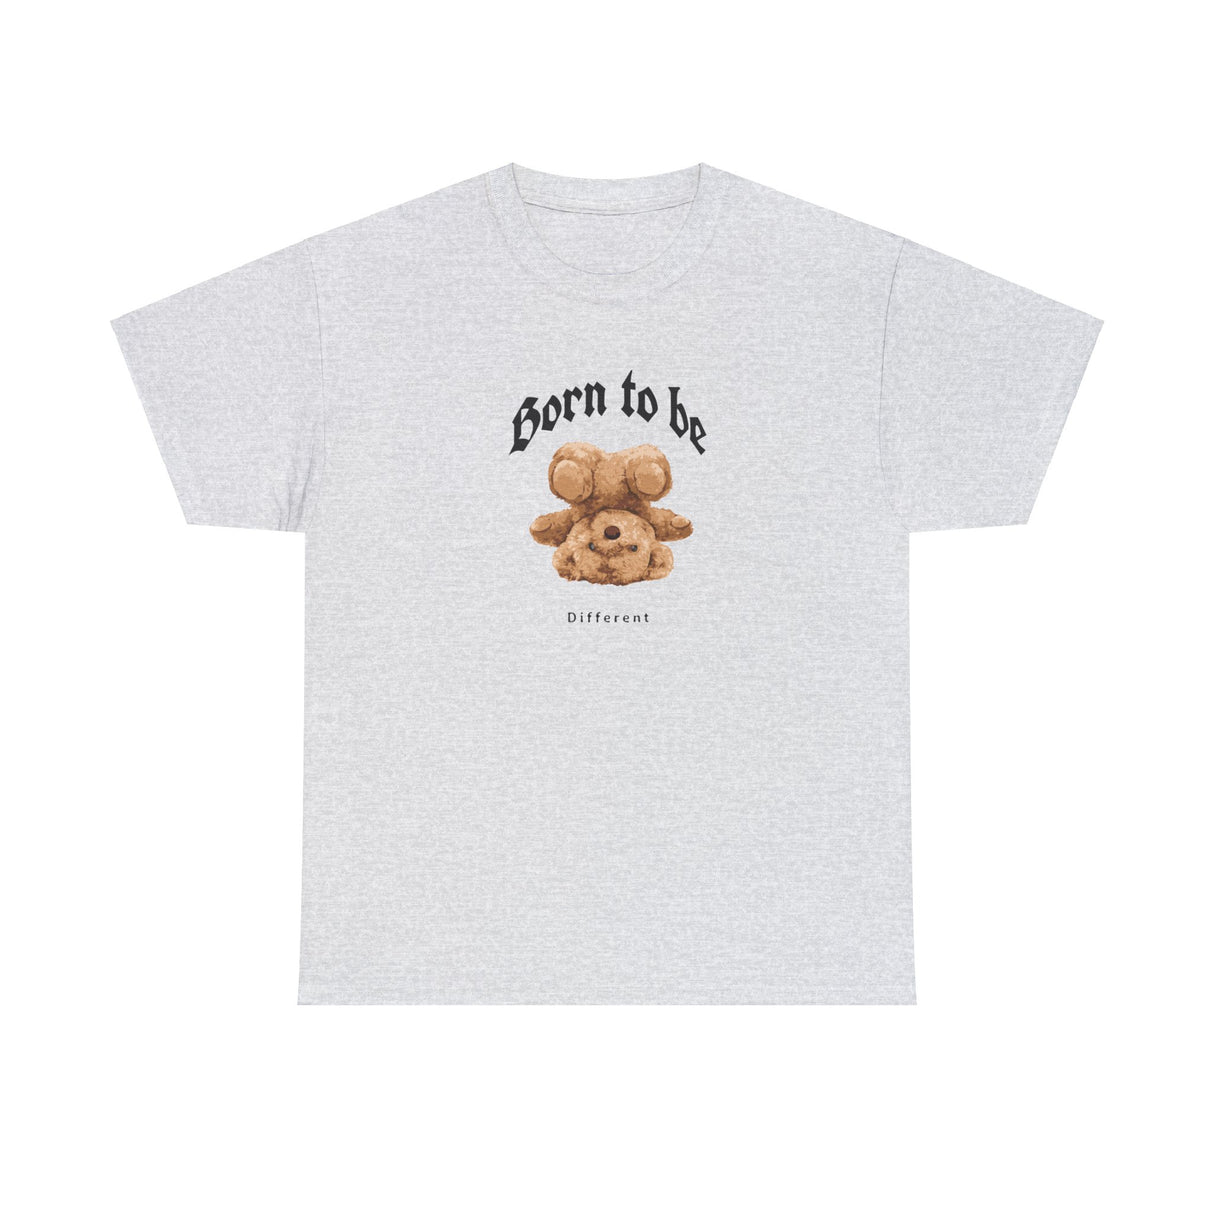 Born To Be Different Graphic Tee Shirt